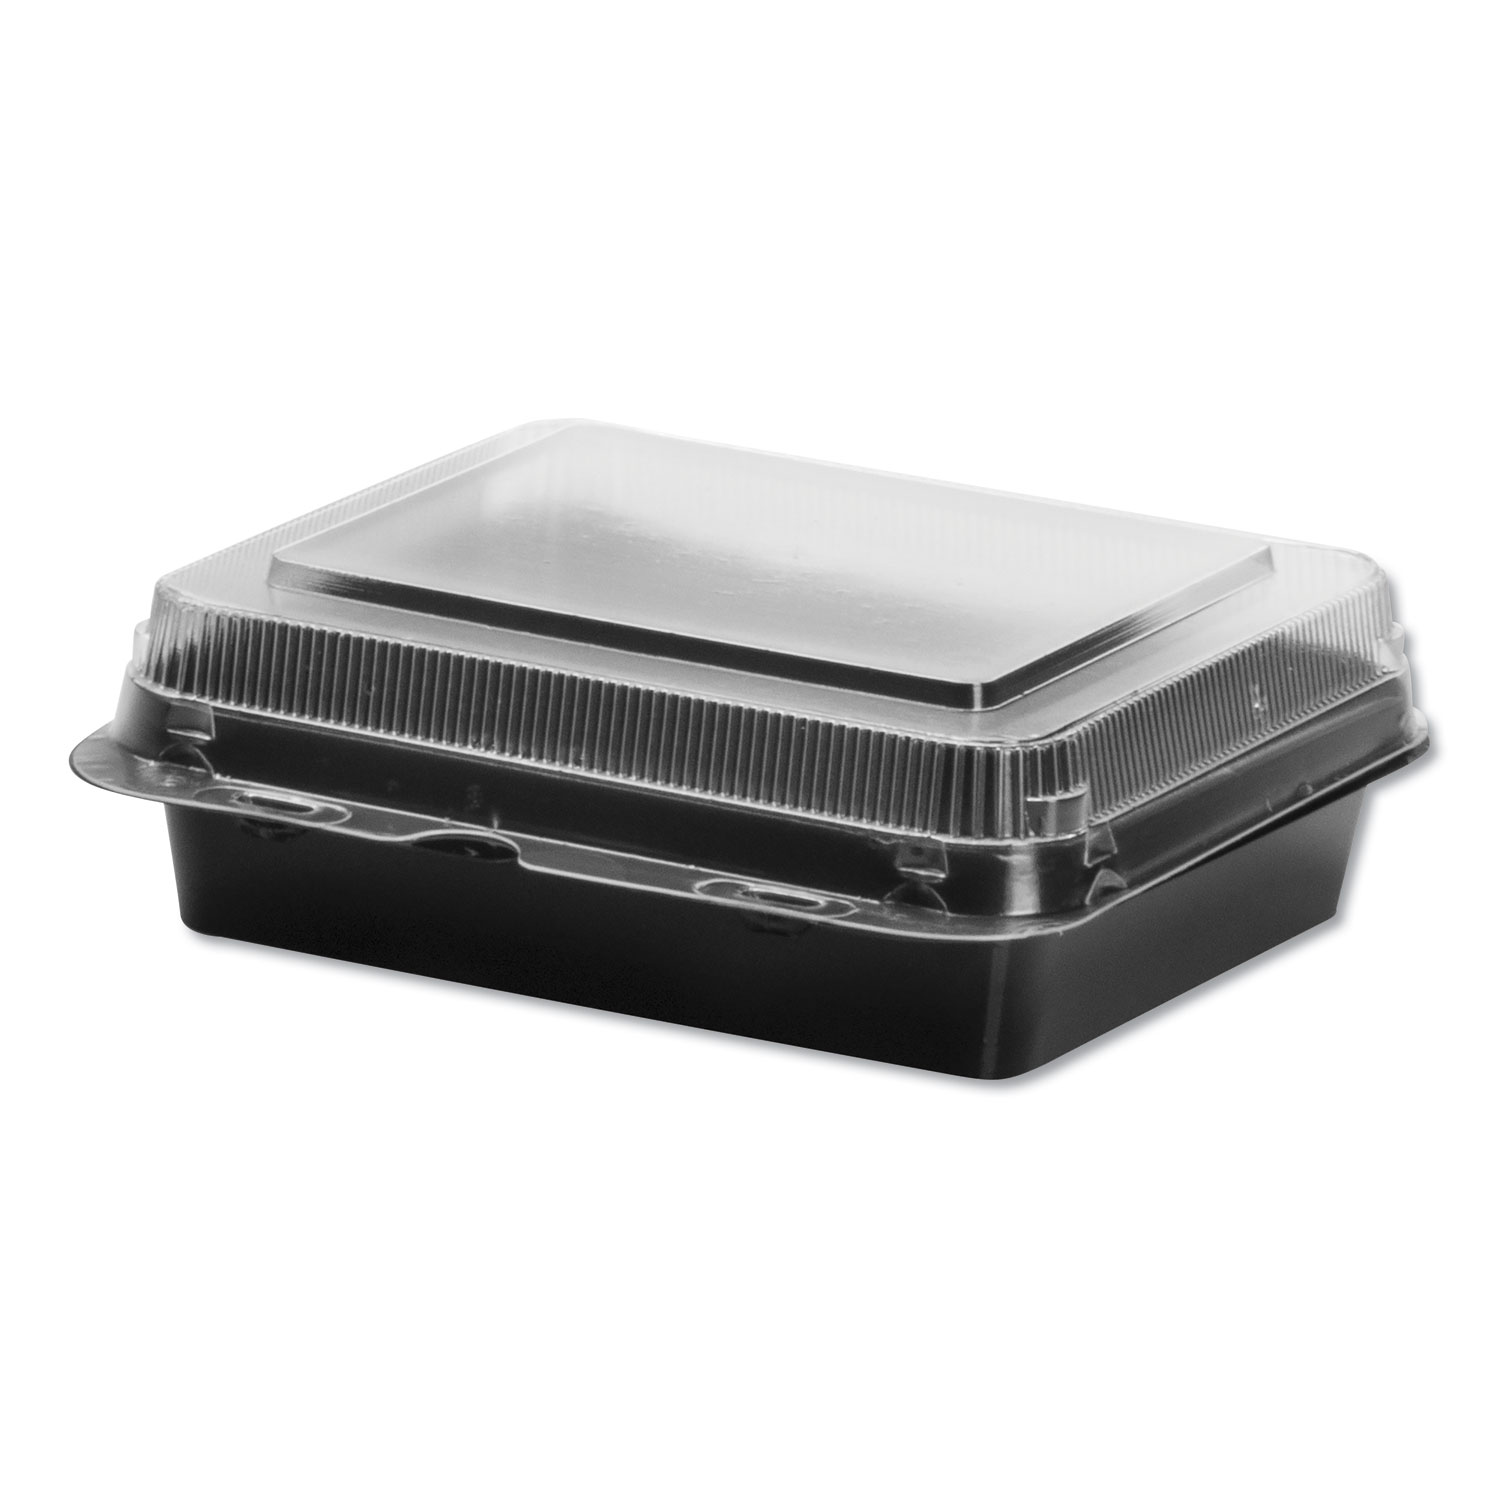  Dart 851611-PS94 Specialty Containers, Black/Clear, 18oz, 6.22w x 5.91d x 2.09h, 200/Carton (SCC851611PS94) 